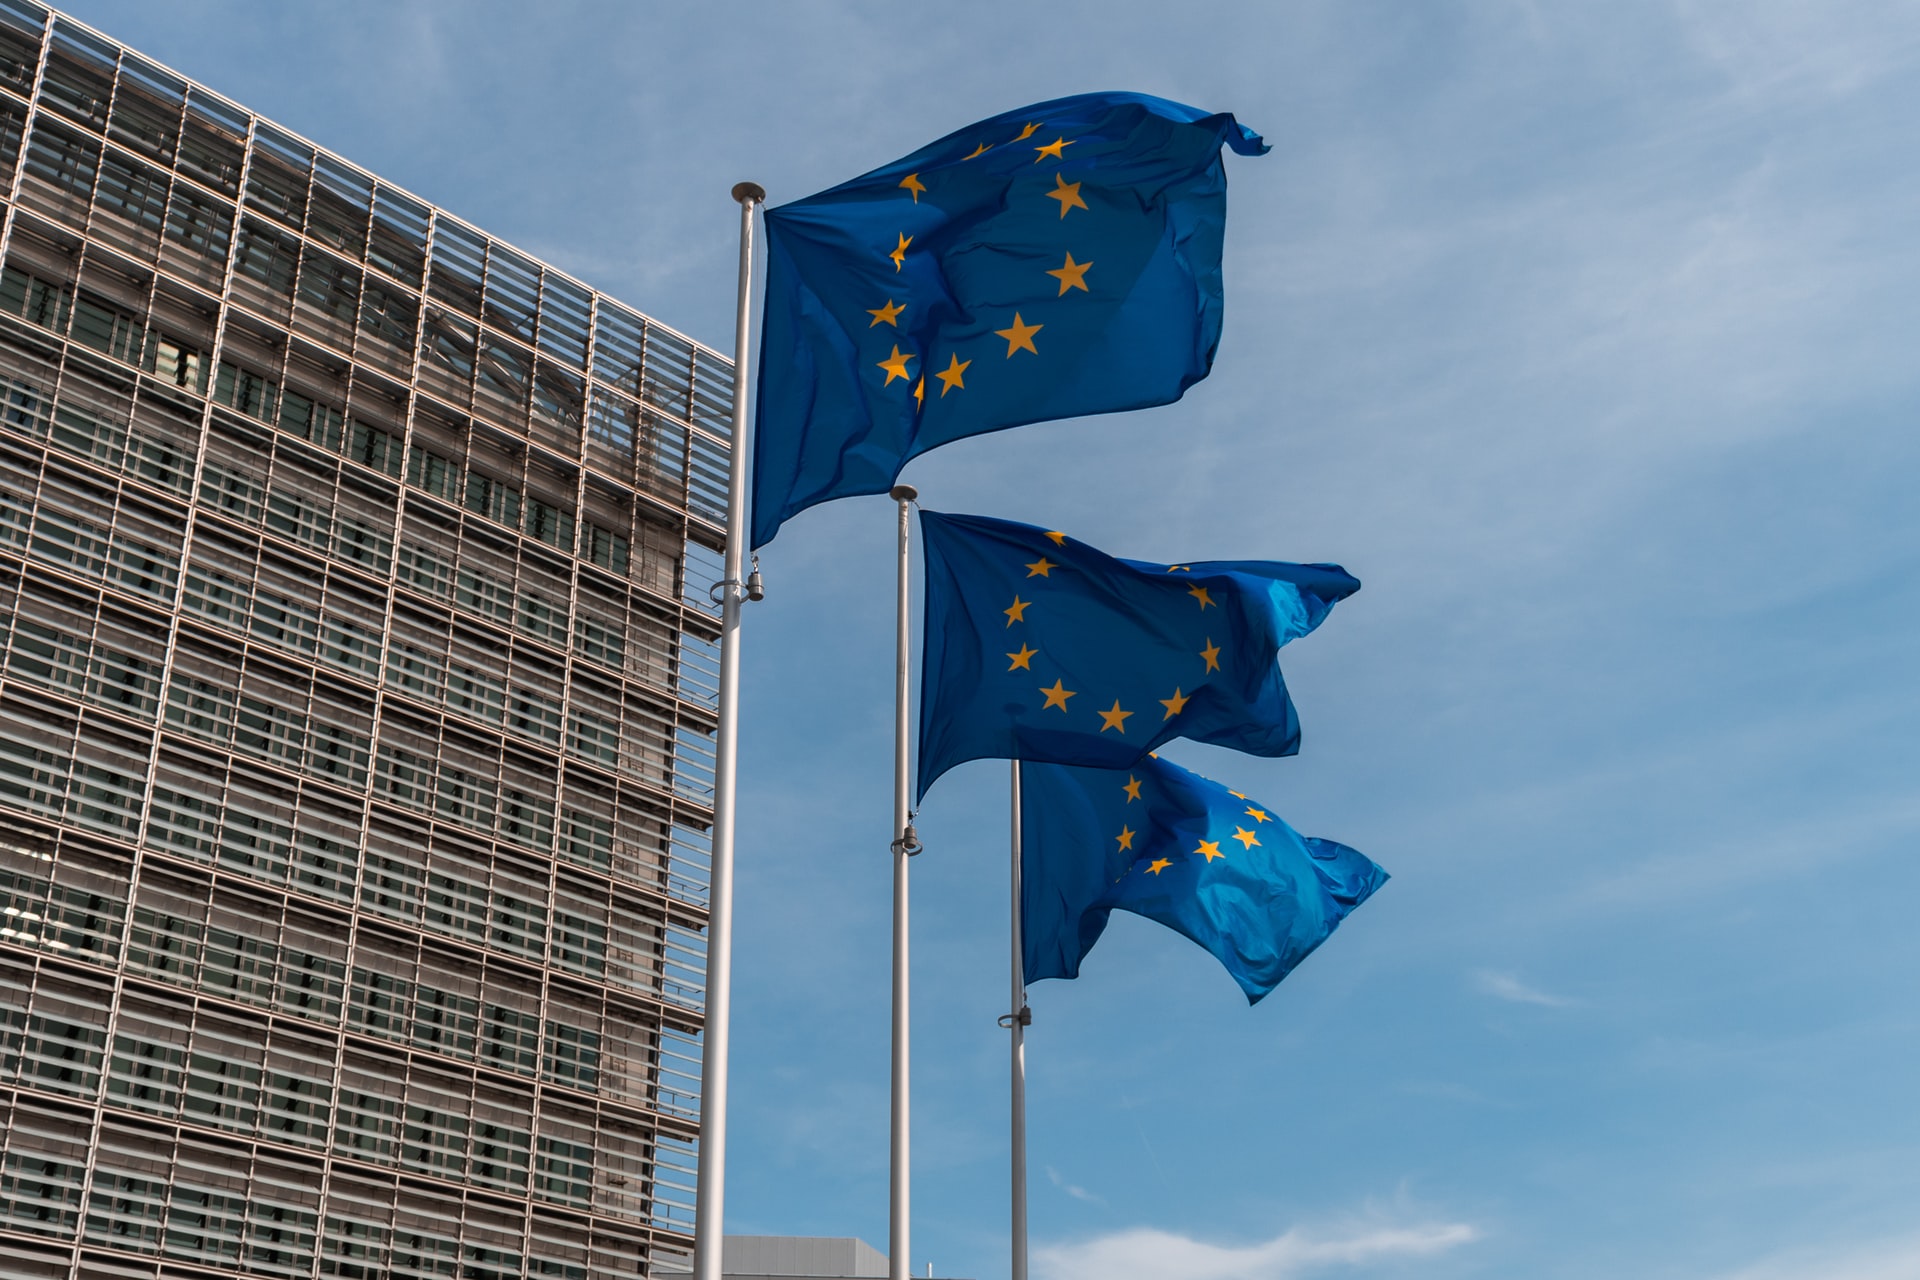 EP Parliamentary Committee publishes Opinion on virtual currencies